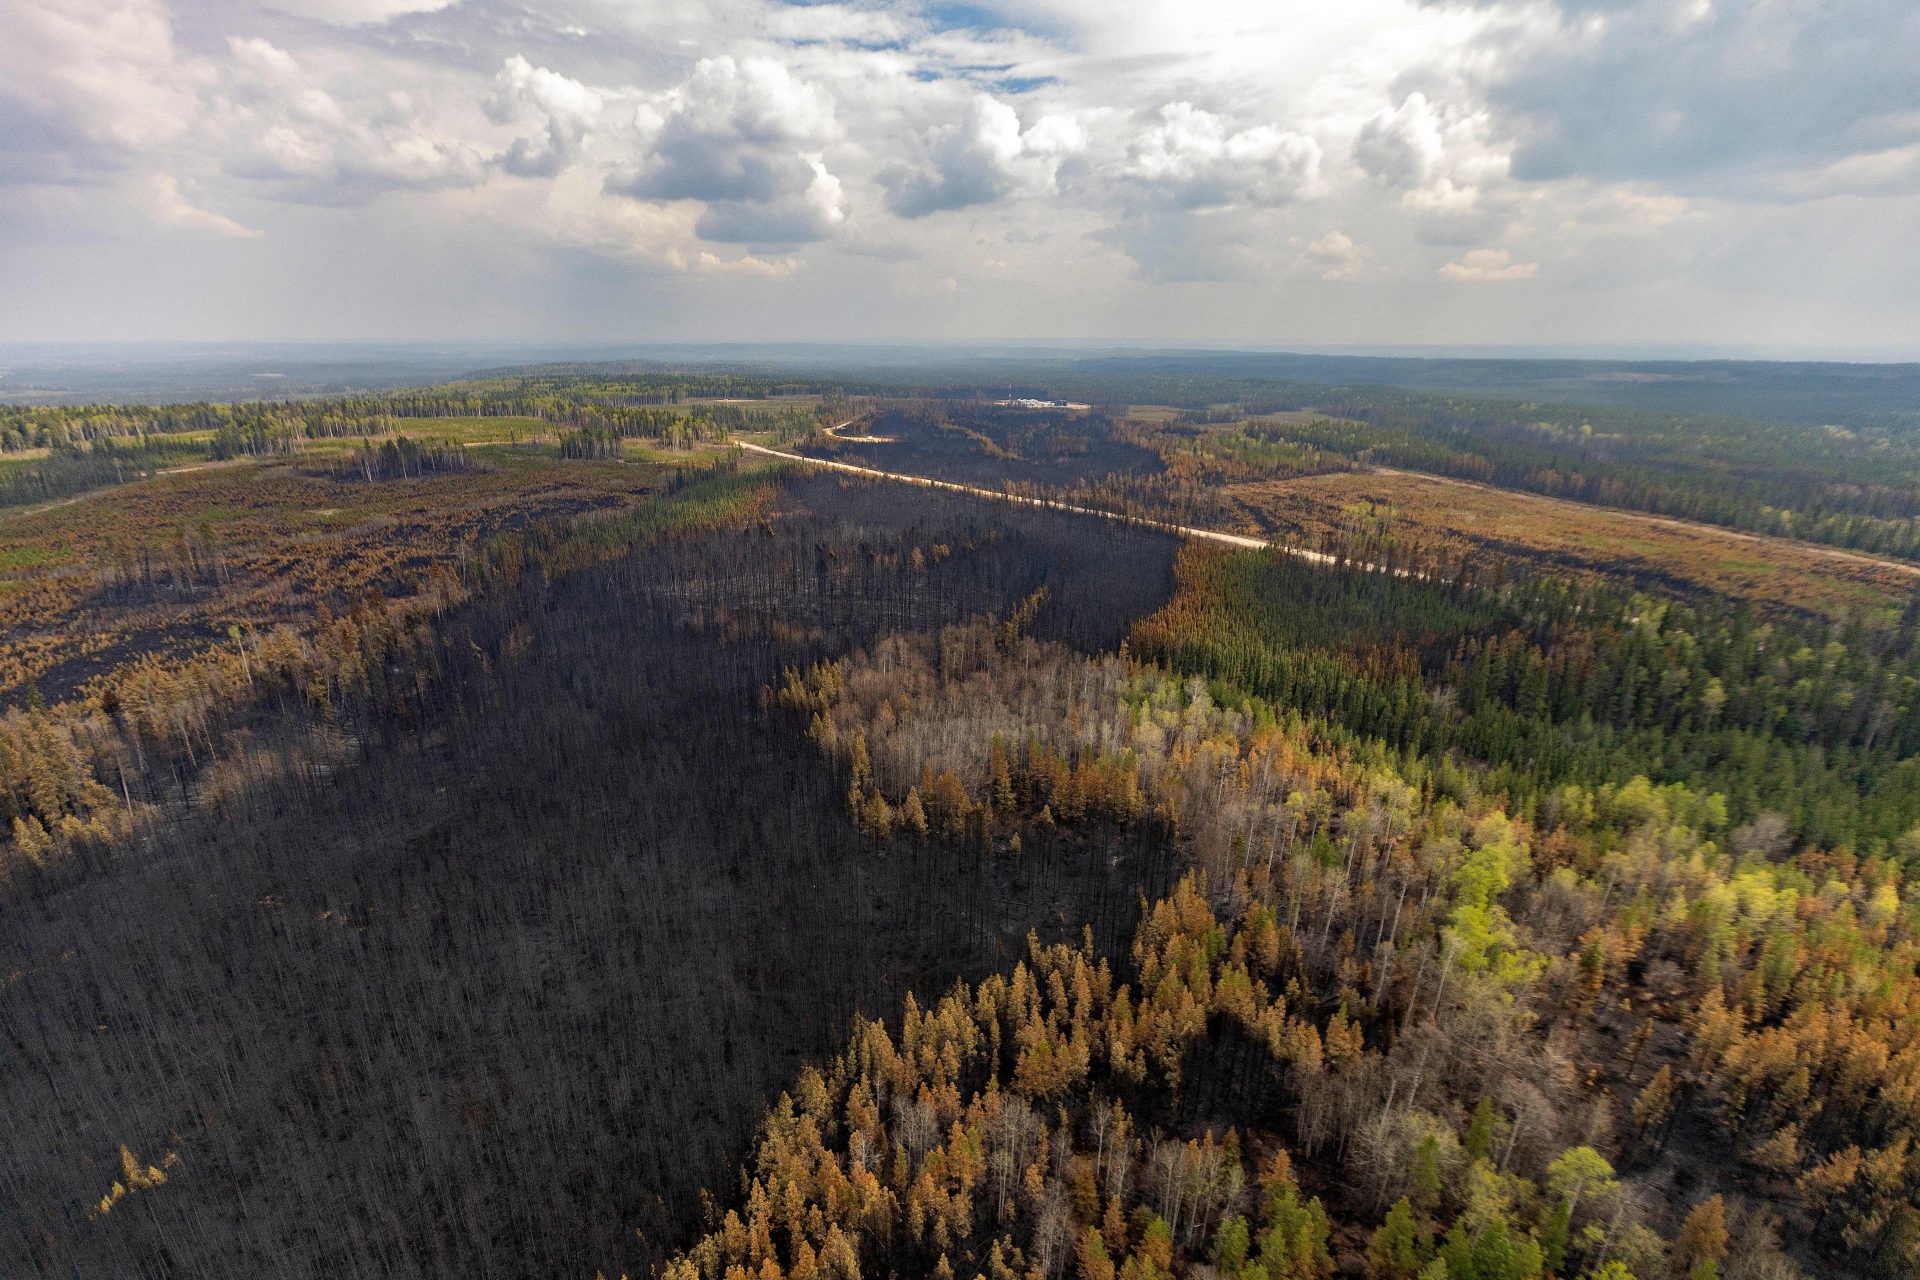 The Canadian Interagency Forest Fire Centre